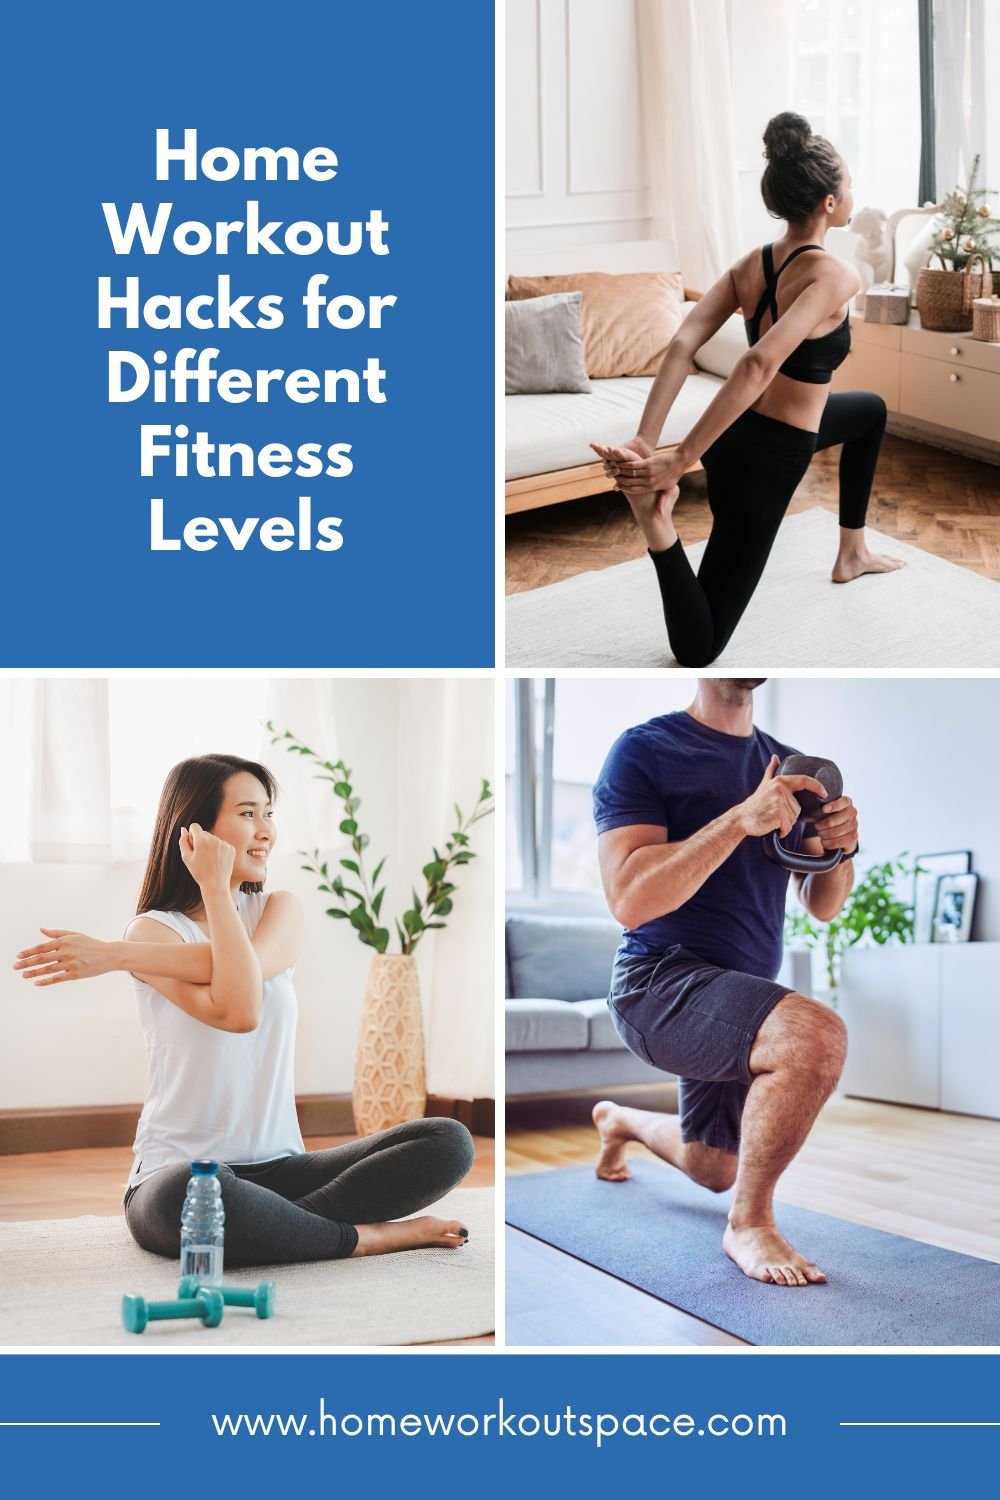 Home Workout Hacks for Different Fitness Levels